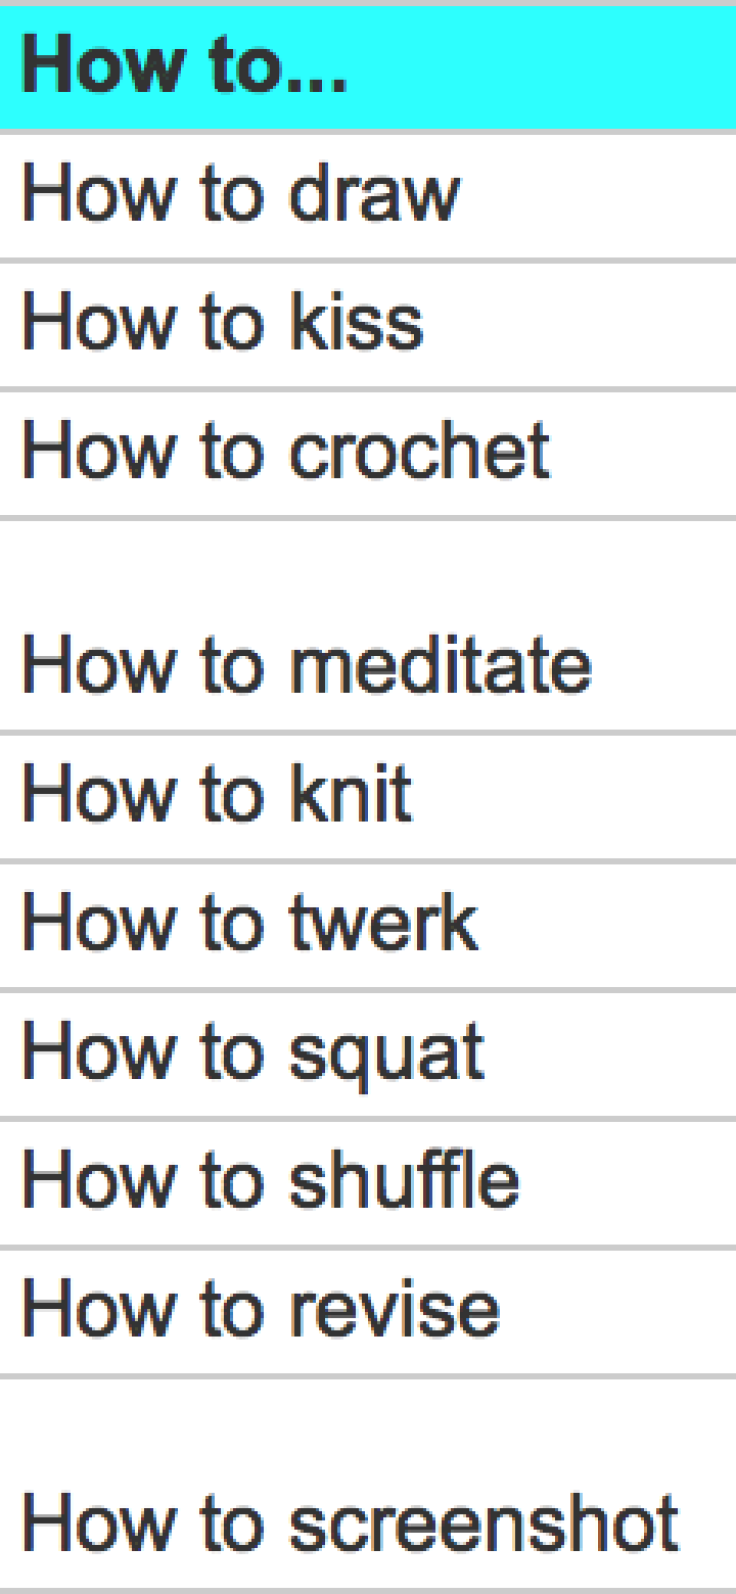 How to Kiss, How to Crochet, How to Draw